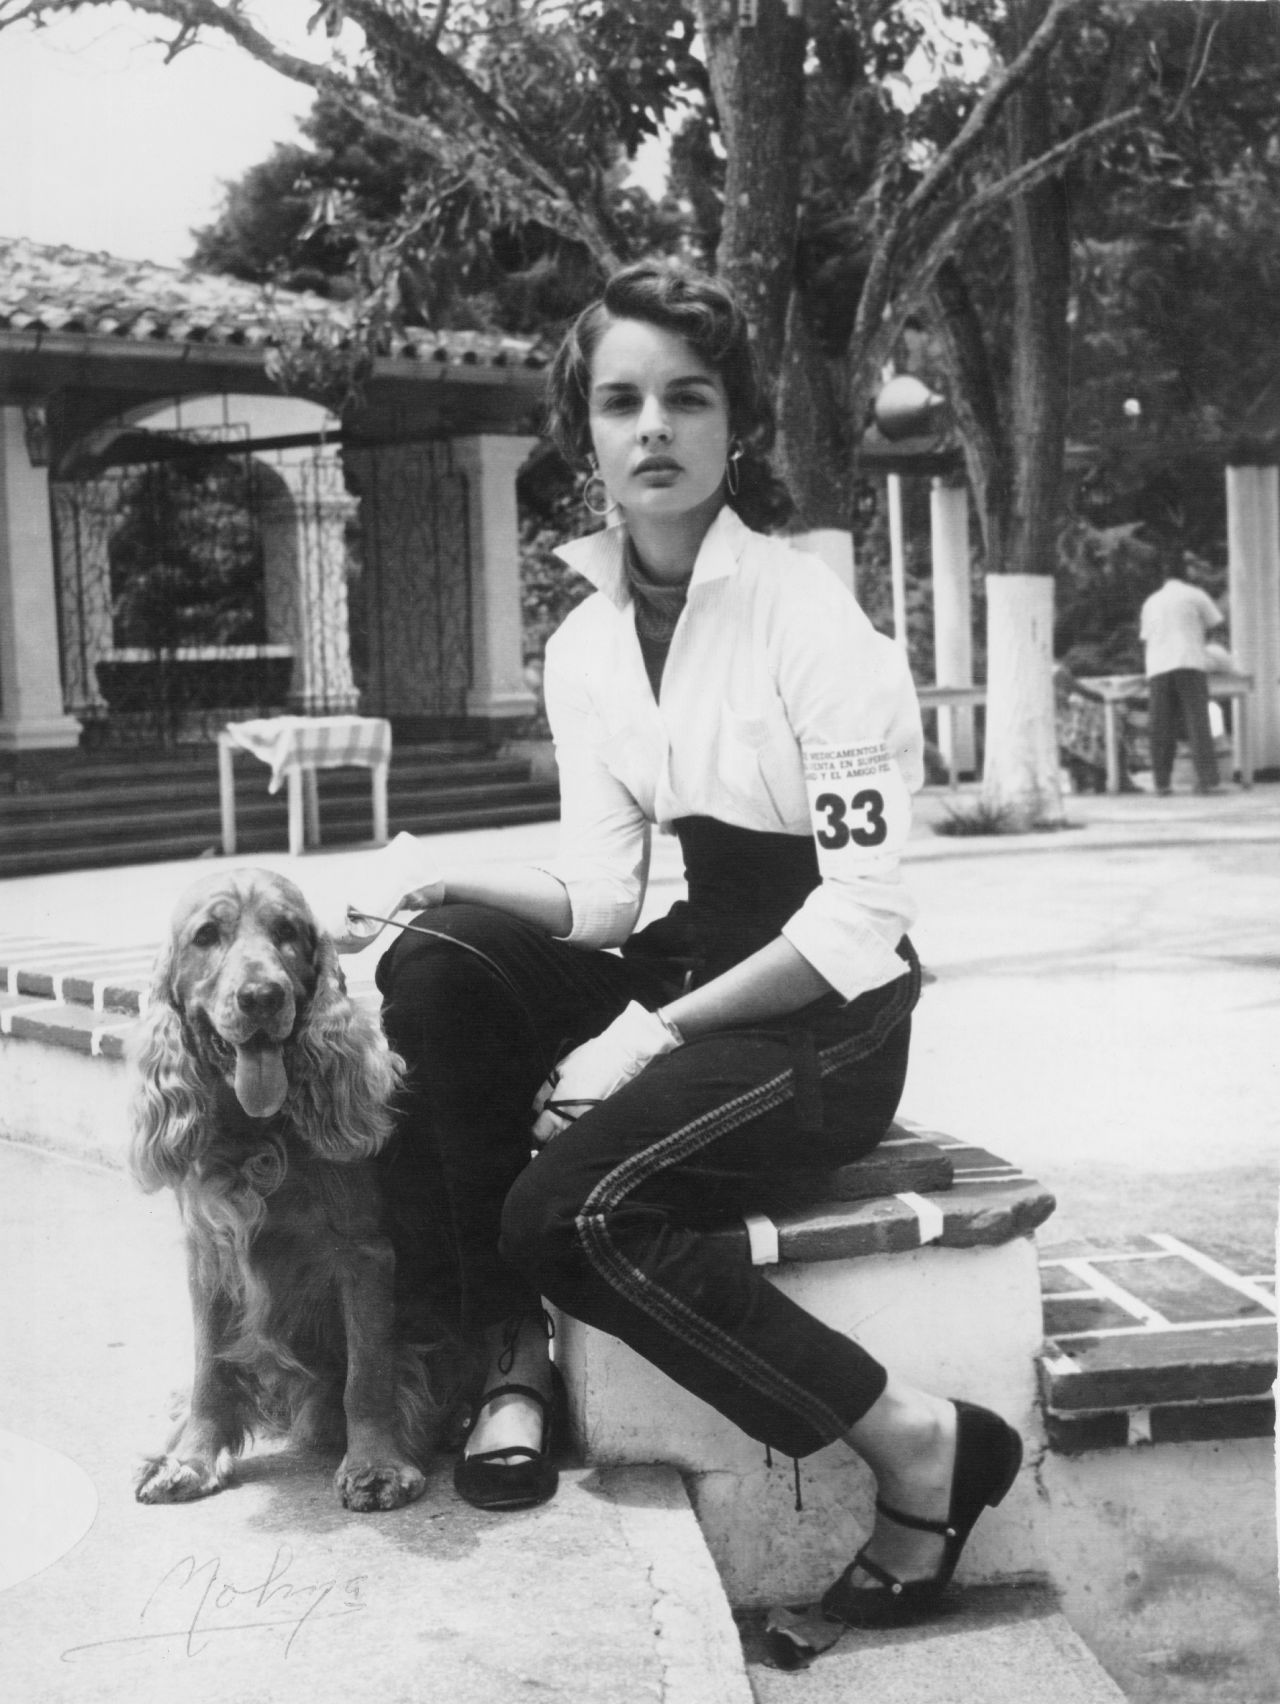 Carolina Herrera, aged 16, with her cocker spaniel, Red, at a dog show in Caracas, Venezuela. She says she was more interested in horses than fashion as a child, but was always surrounded by beautifully dressed women.